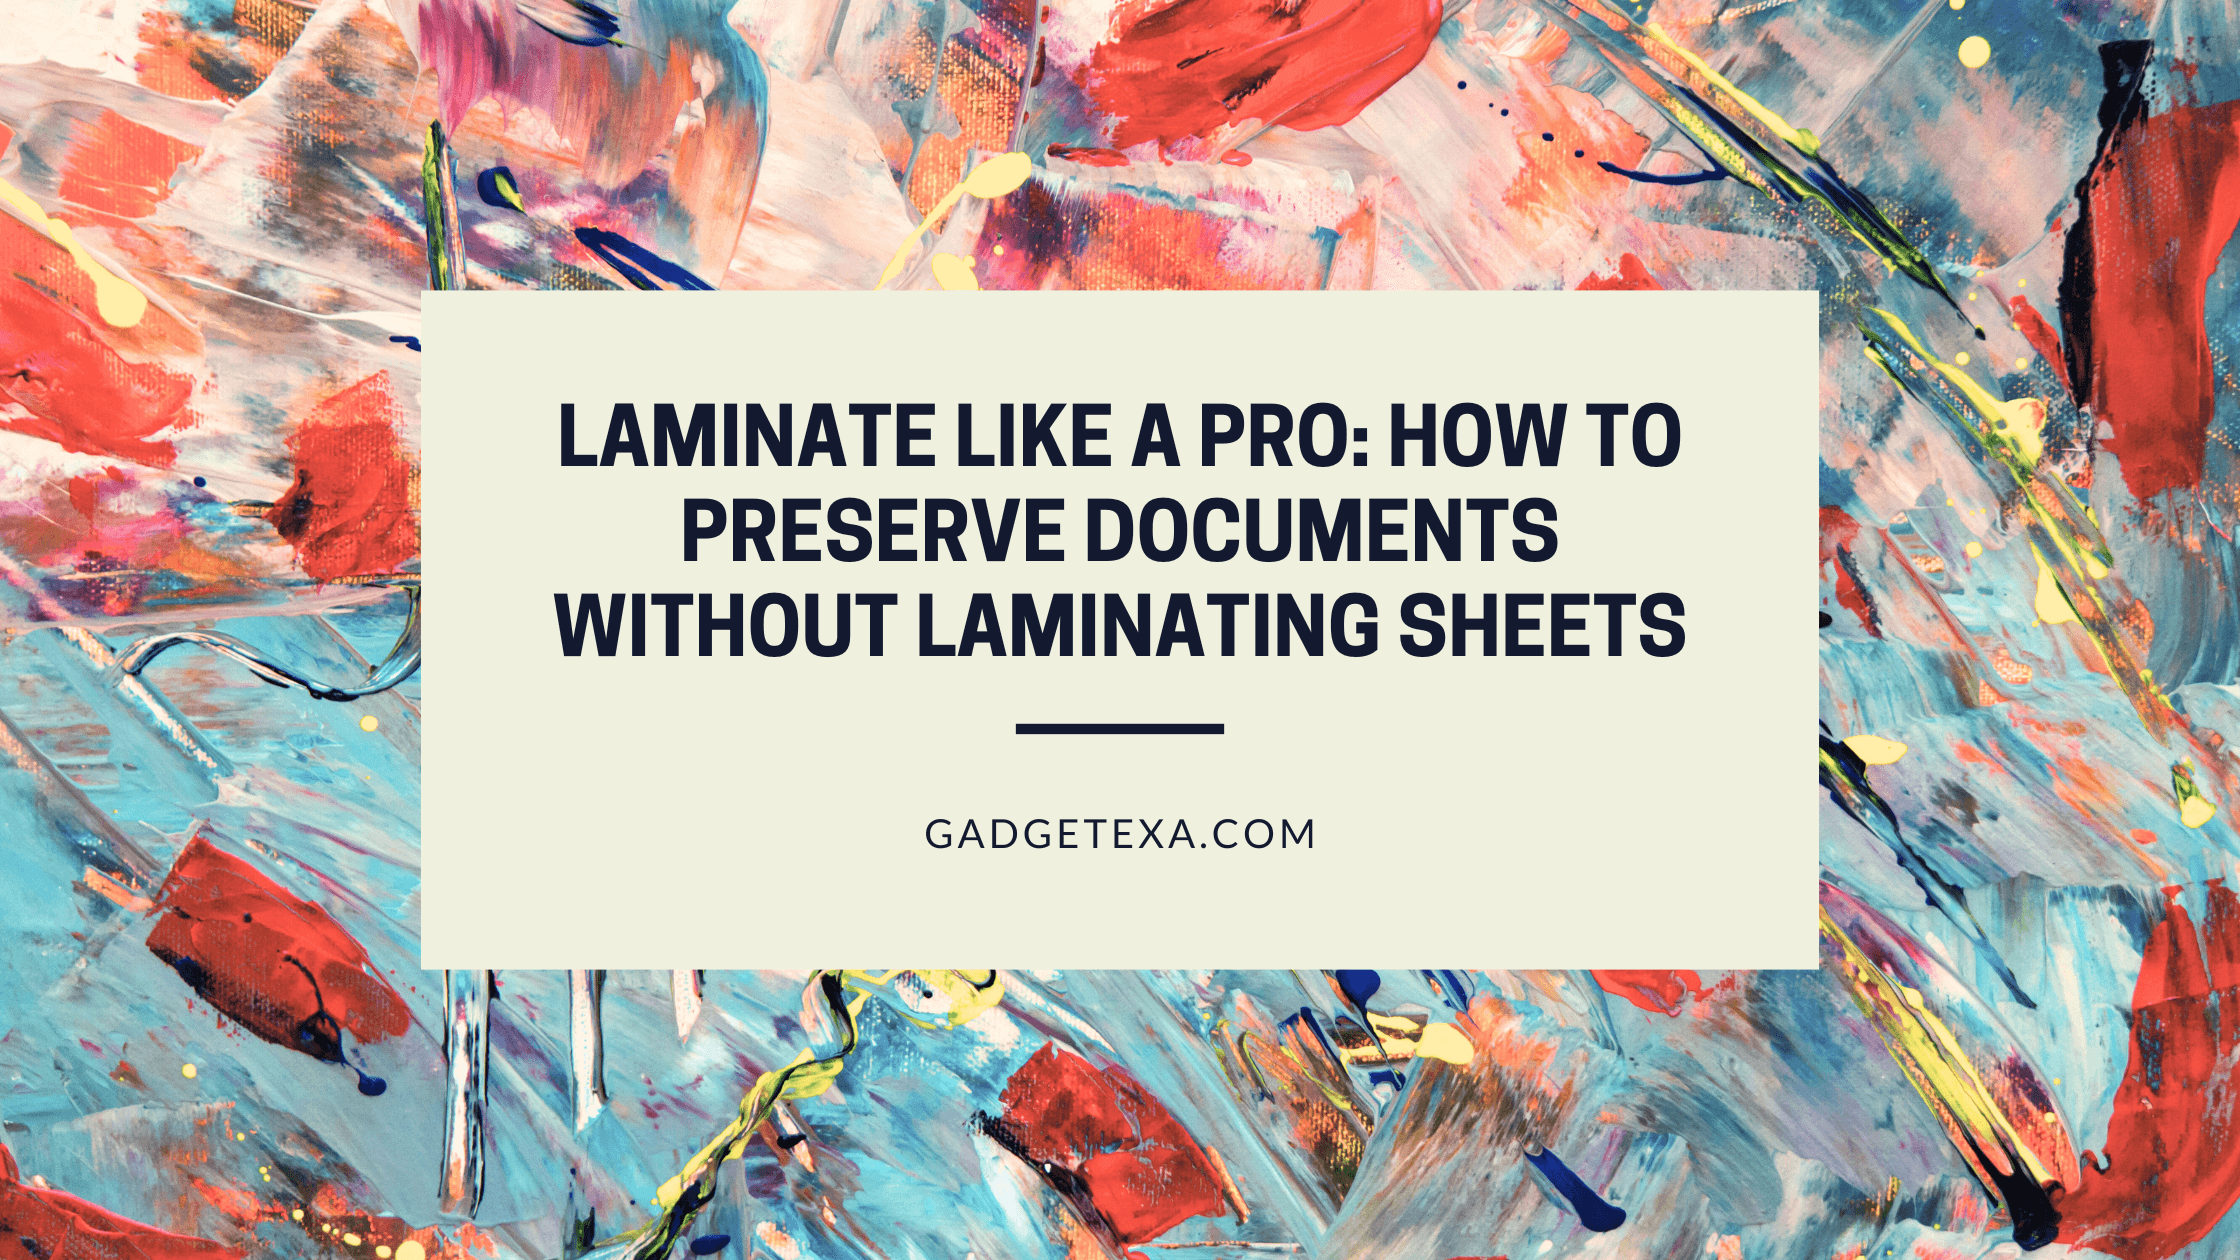 You are currently viewing Laminate Like a Pro: How to Preserve Documents Without Laminating Sheets